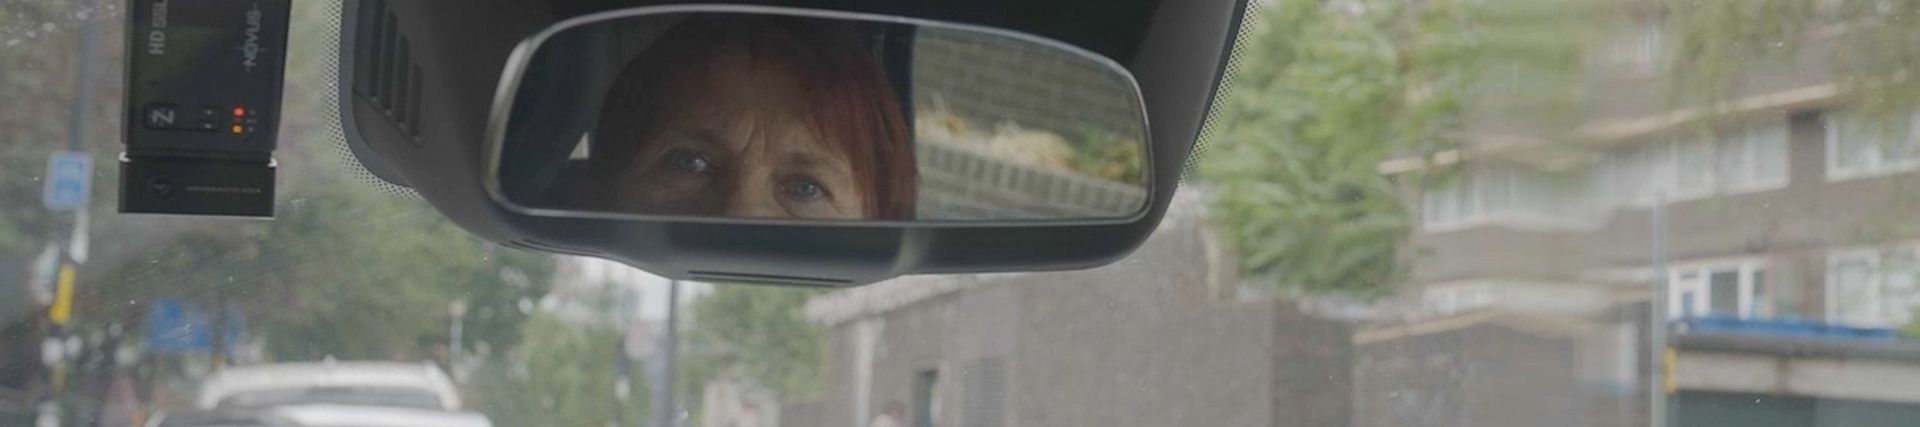 Taxi driver's eyes reflected in their car mirror